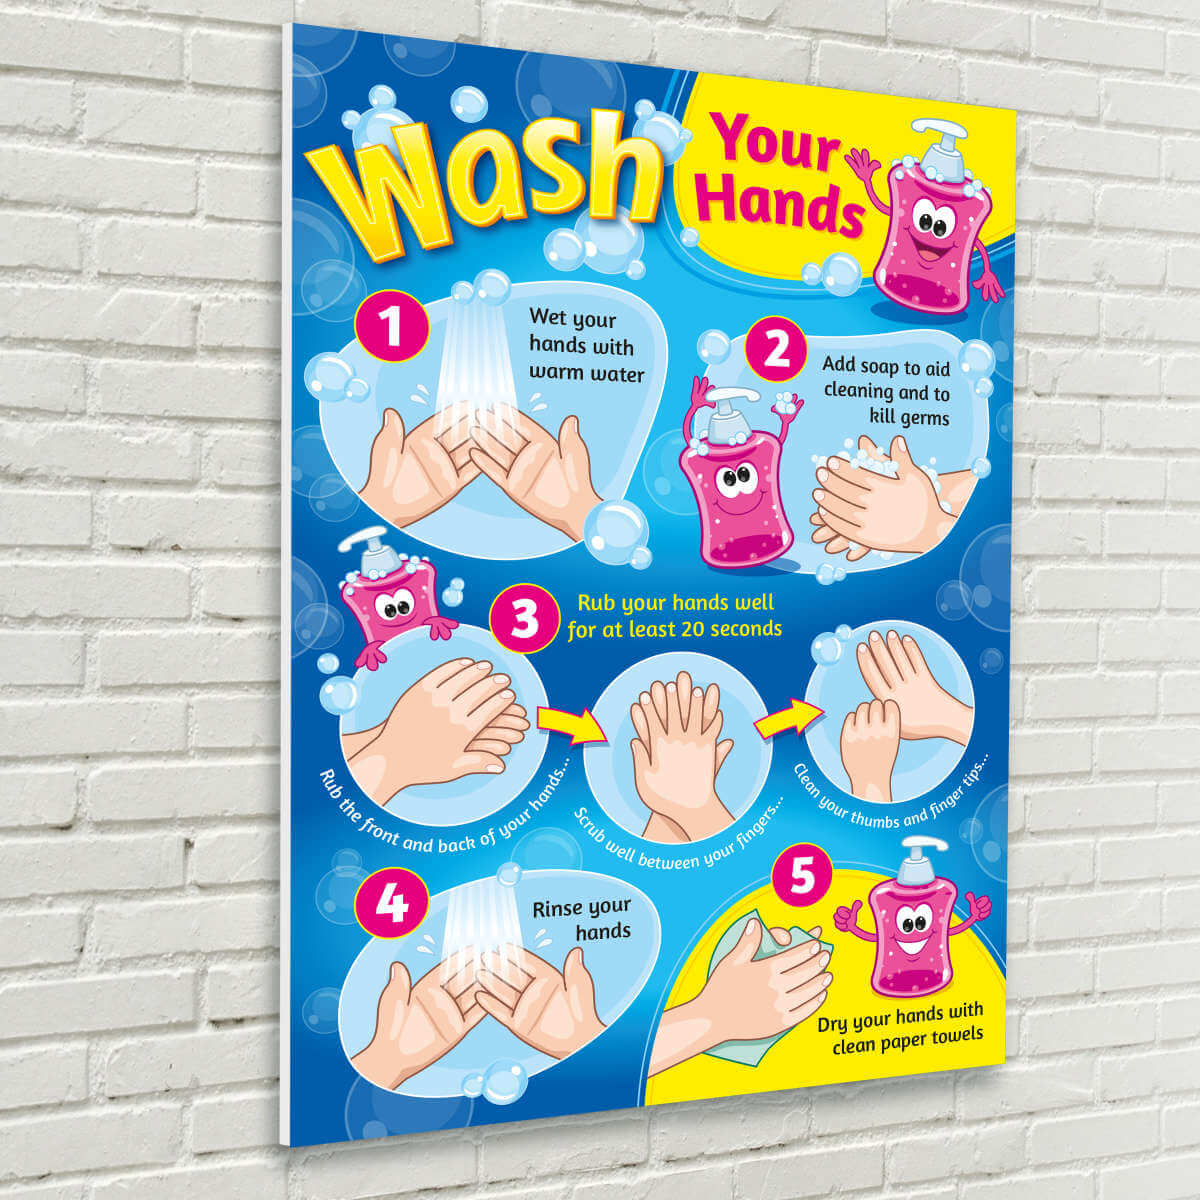 wash-your-hands-sign-for-schools-and-nurseries-hygiene-signs